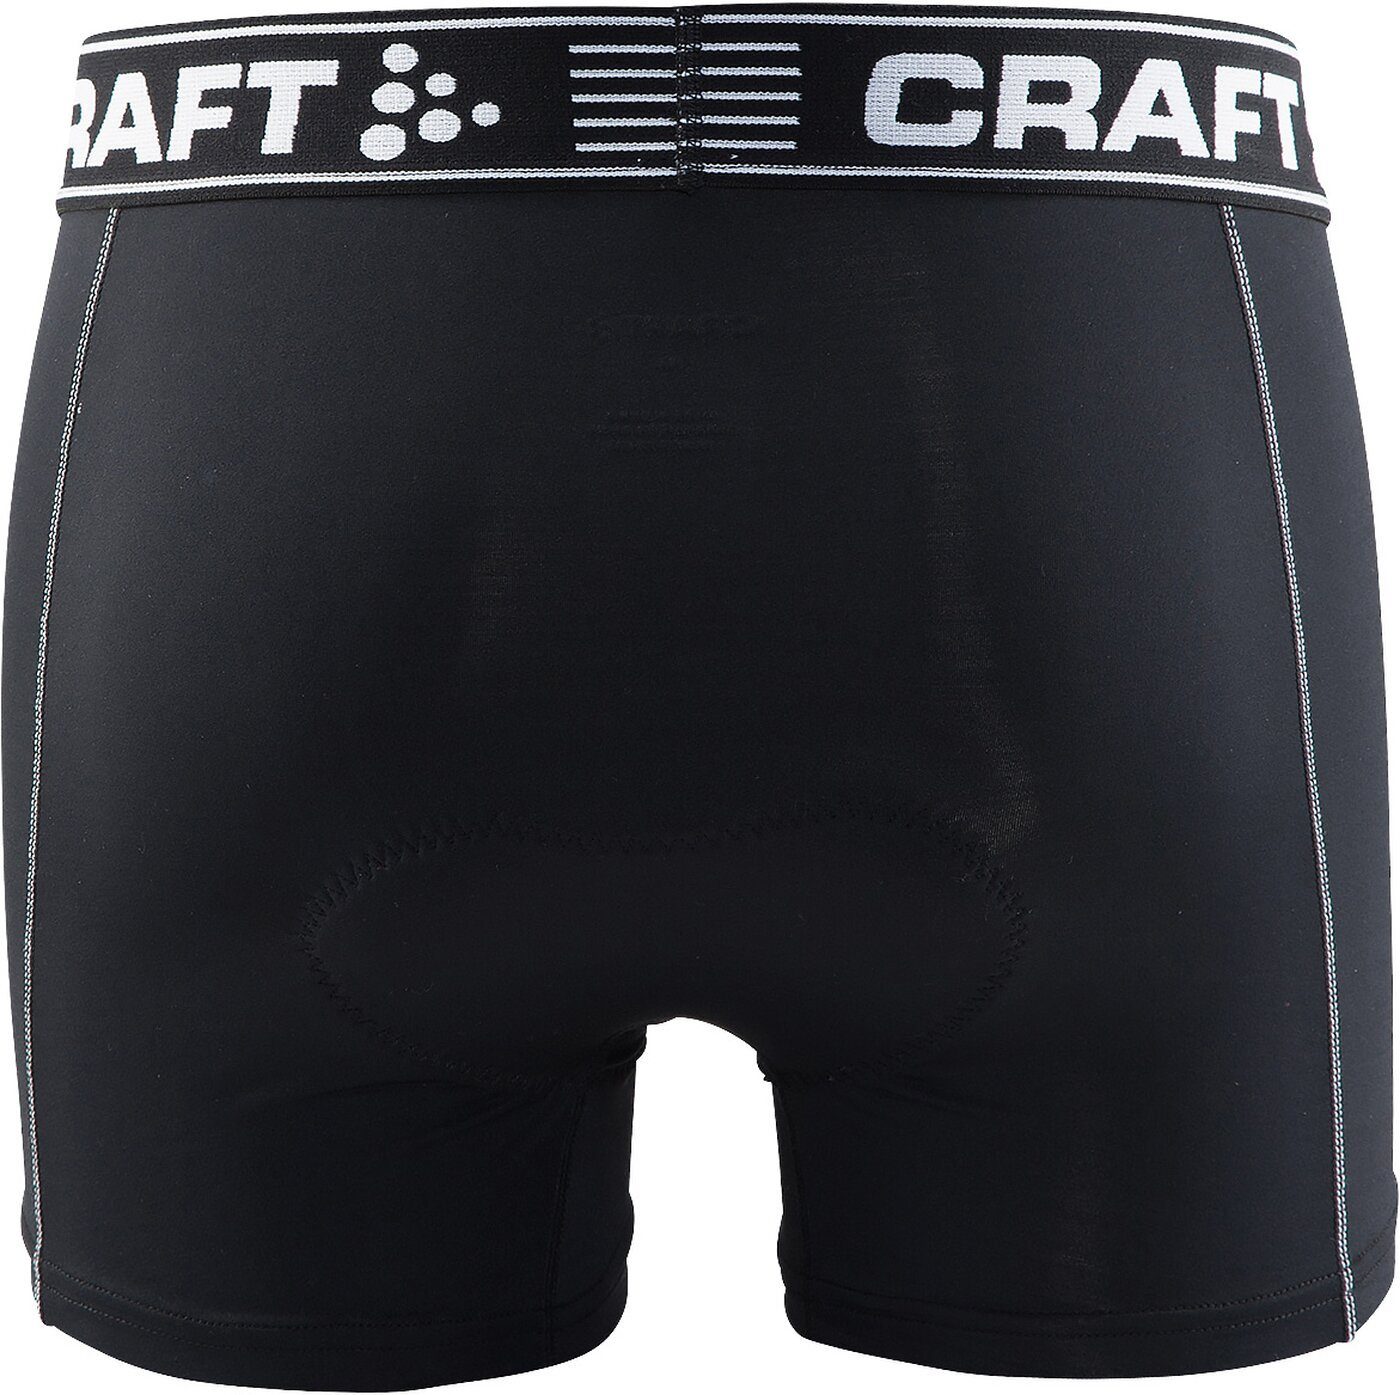 Bike Core BLACK/WHITE Craft Greatness Funktionsboxer Boxer M